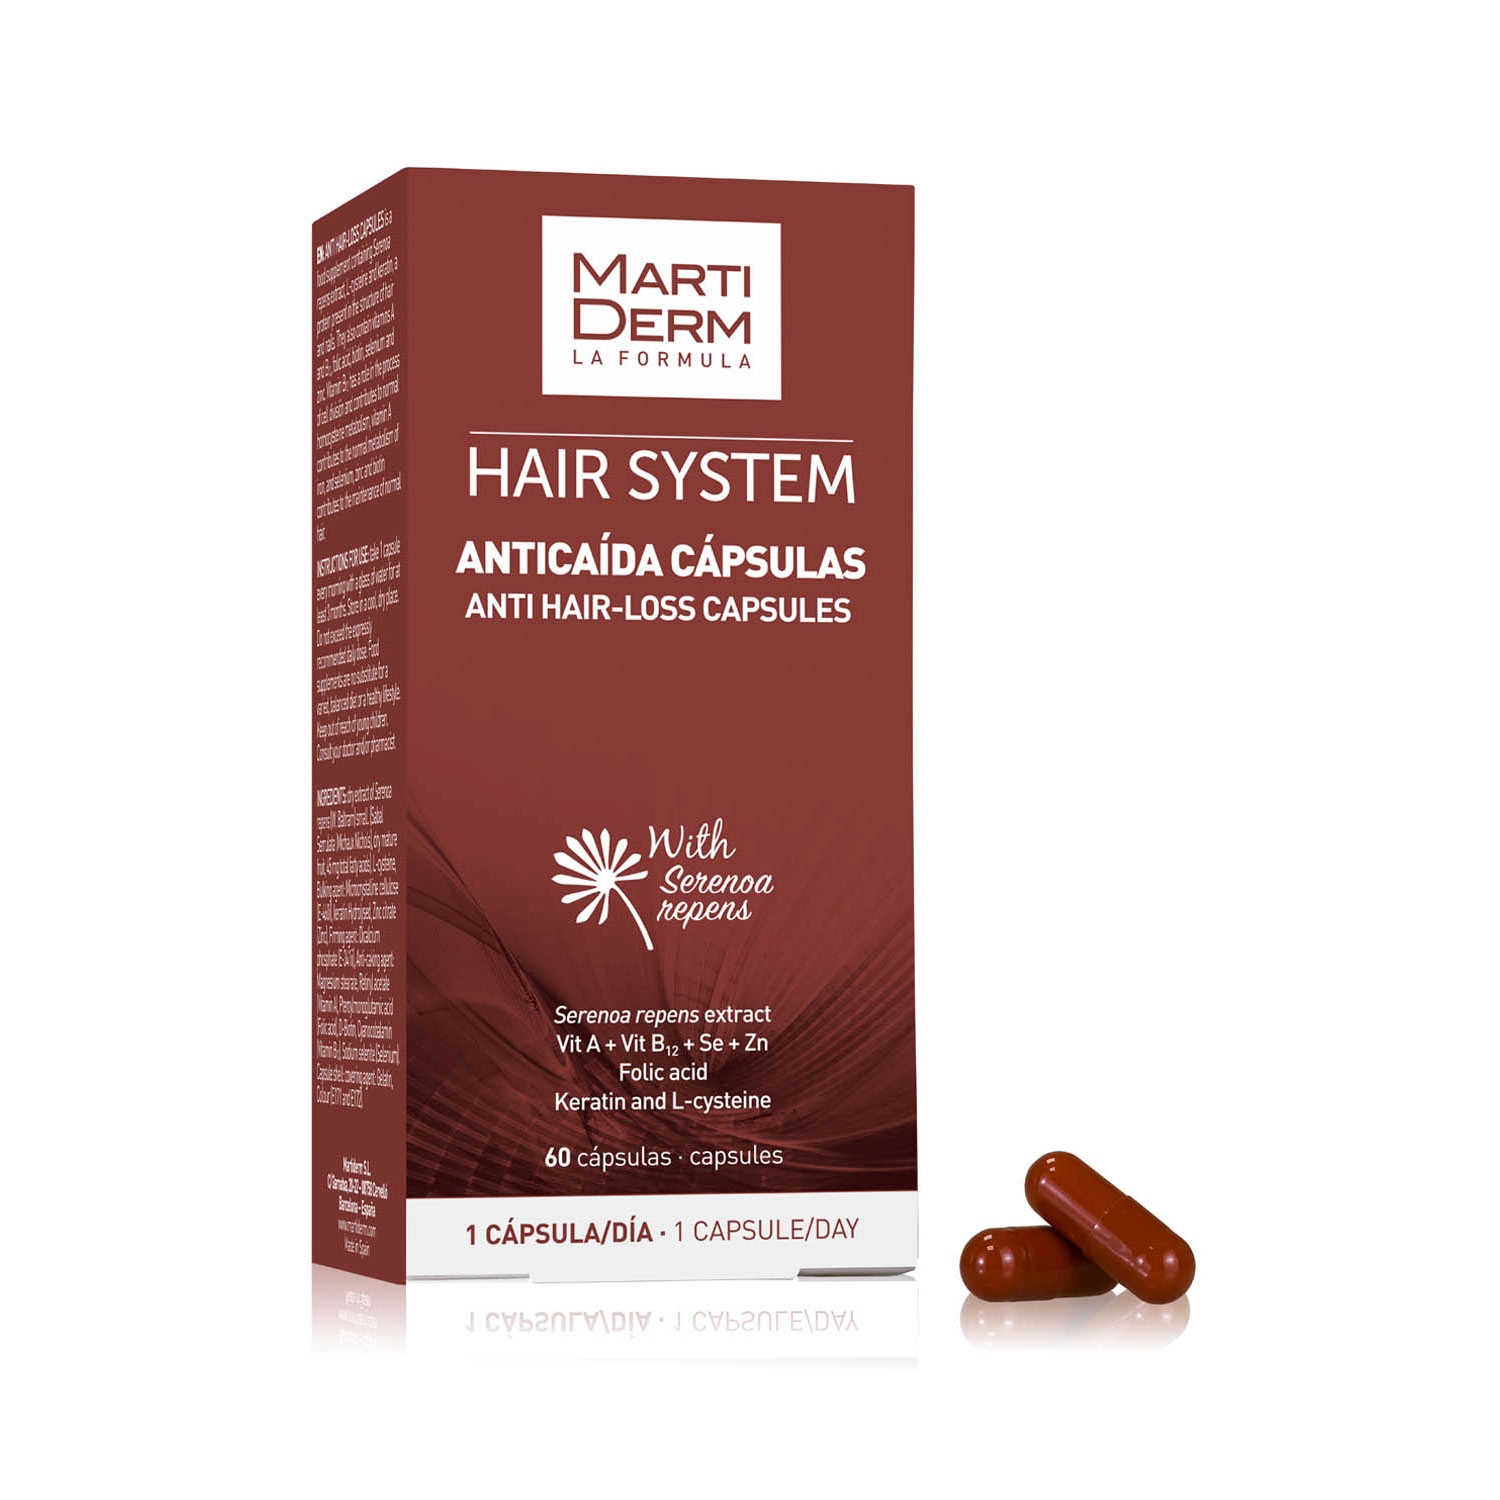 Hair System Anti Hair-Loss Capsules - 60 units - MartiDerm the brand in  cosmetic dermatology.